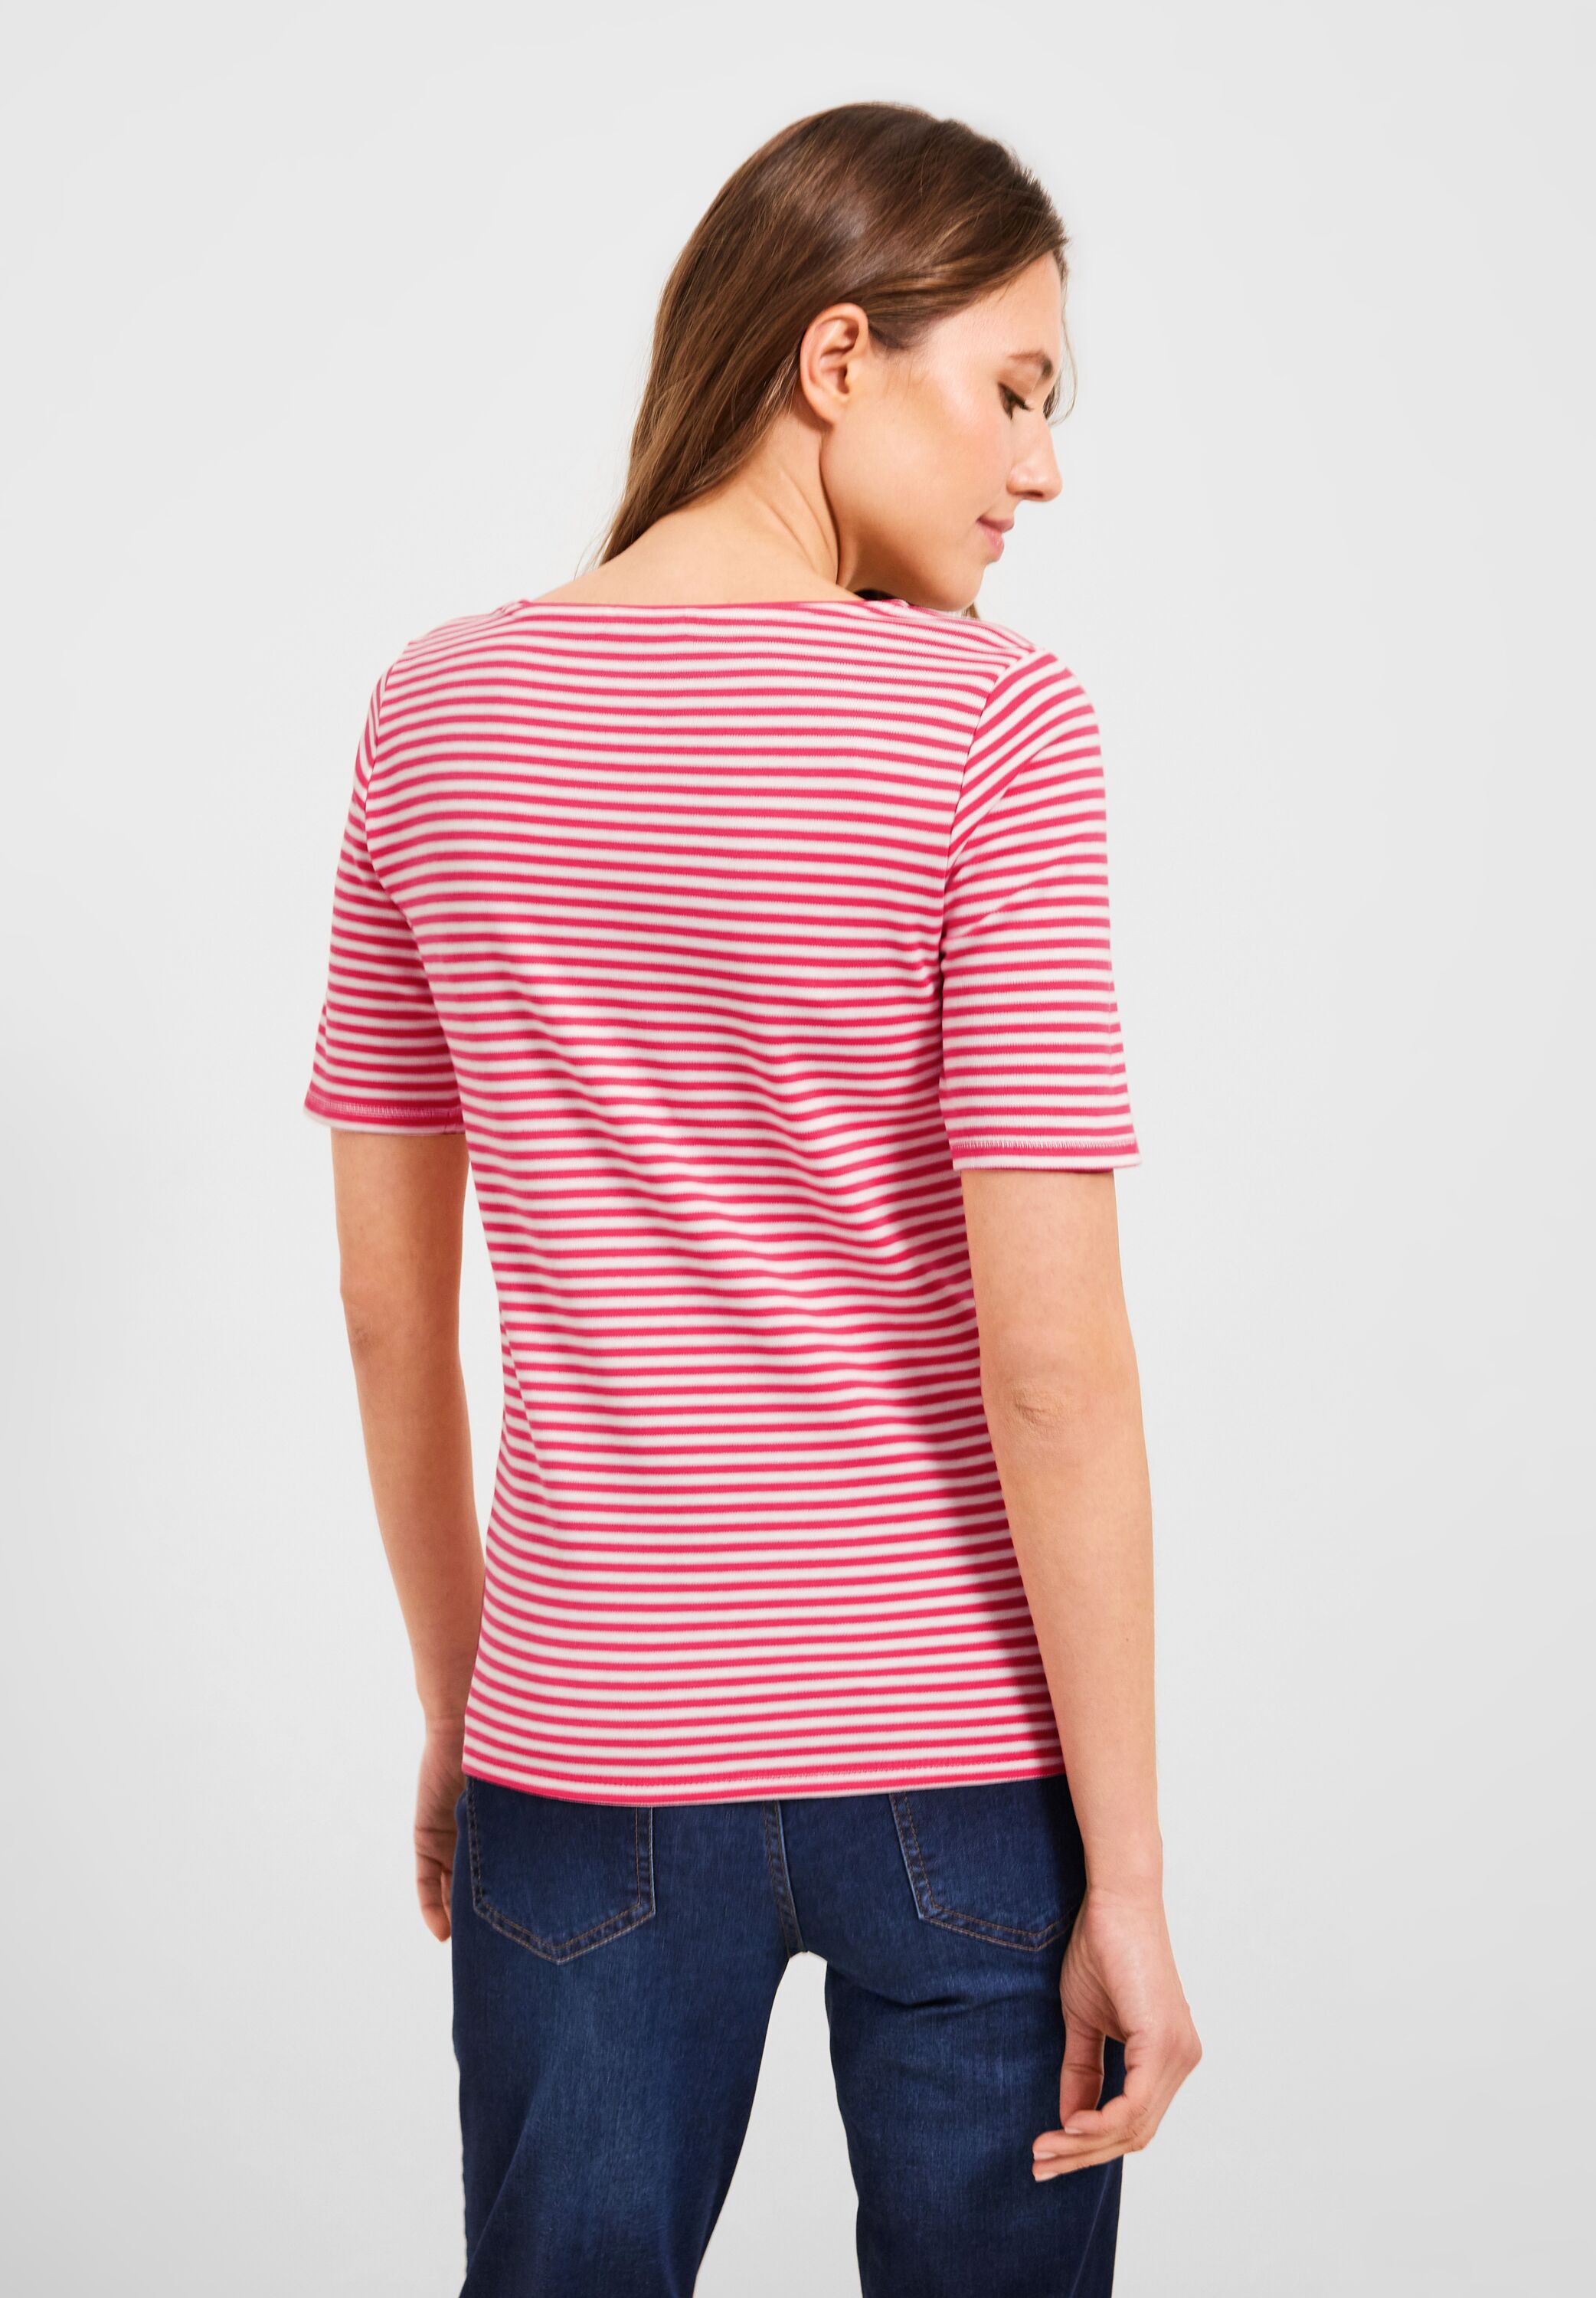 Strawberry - Red im T-Shirt in Mode B319591-24472 CECIL SALE CONCEPT reduziert Lena